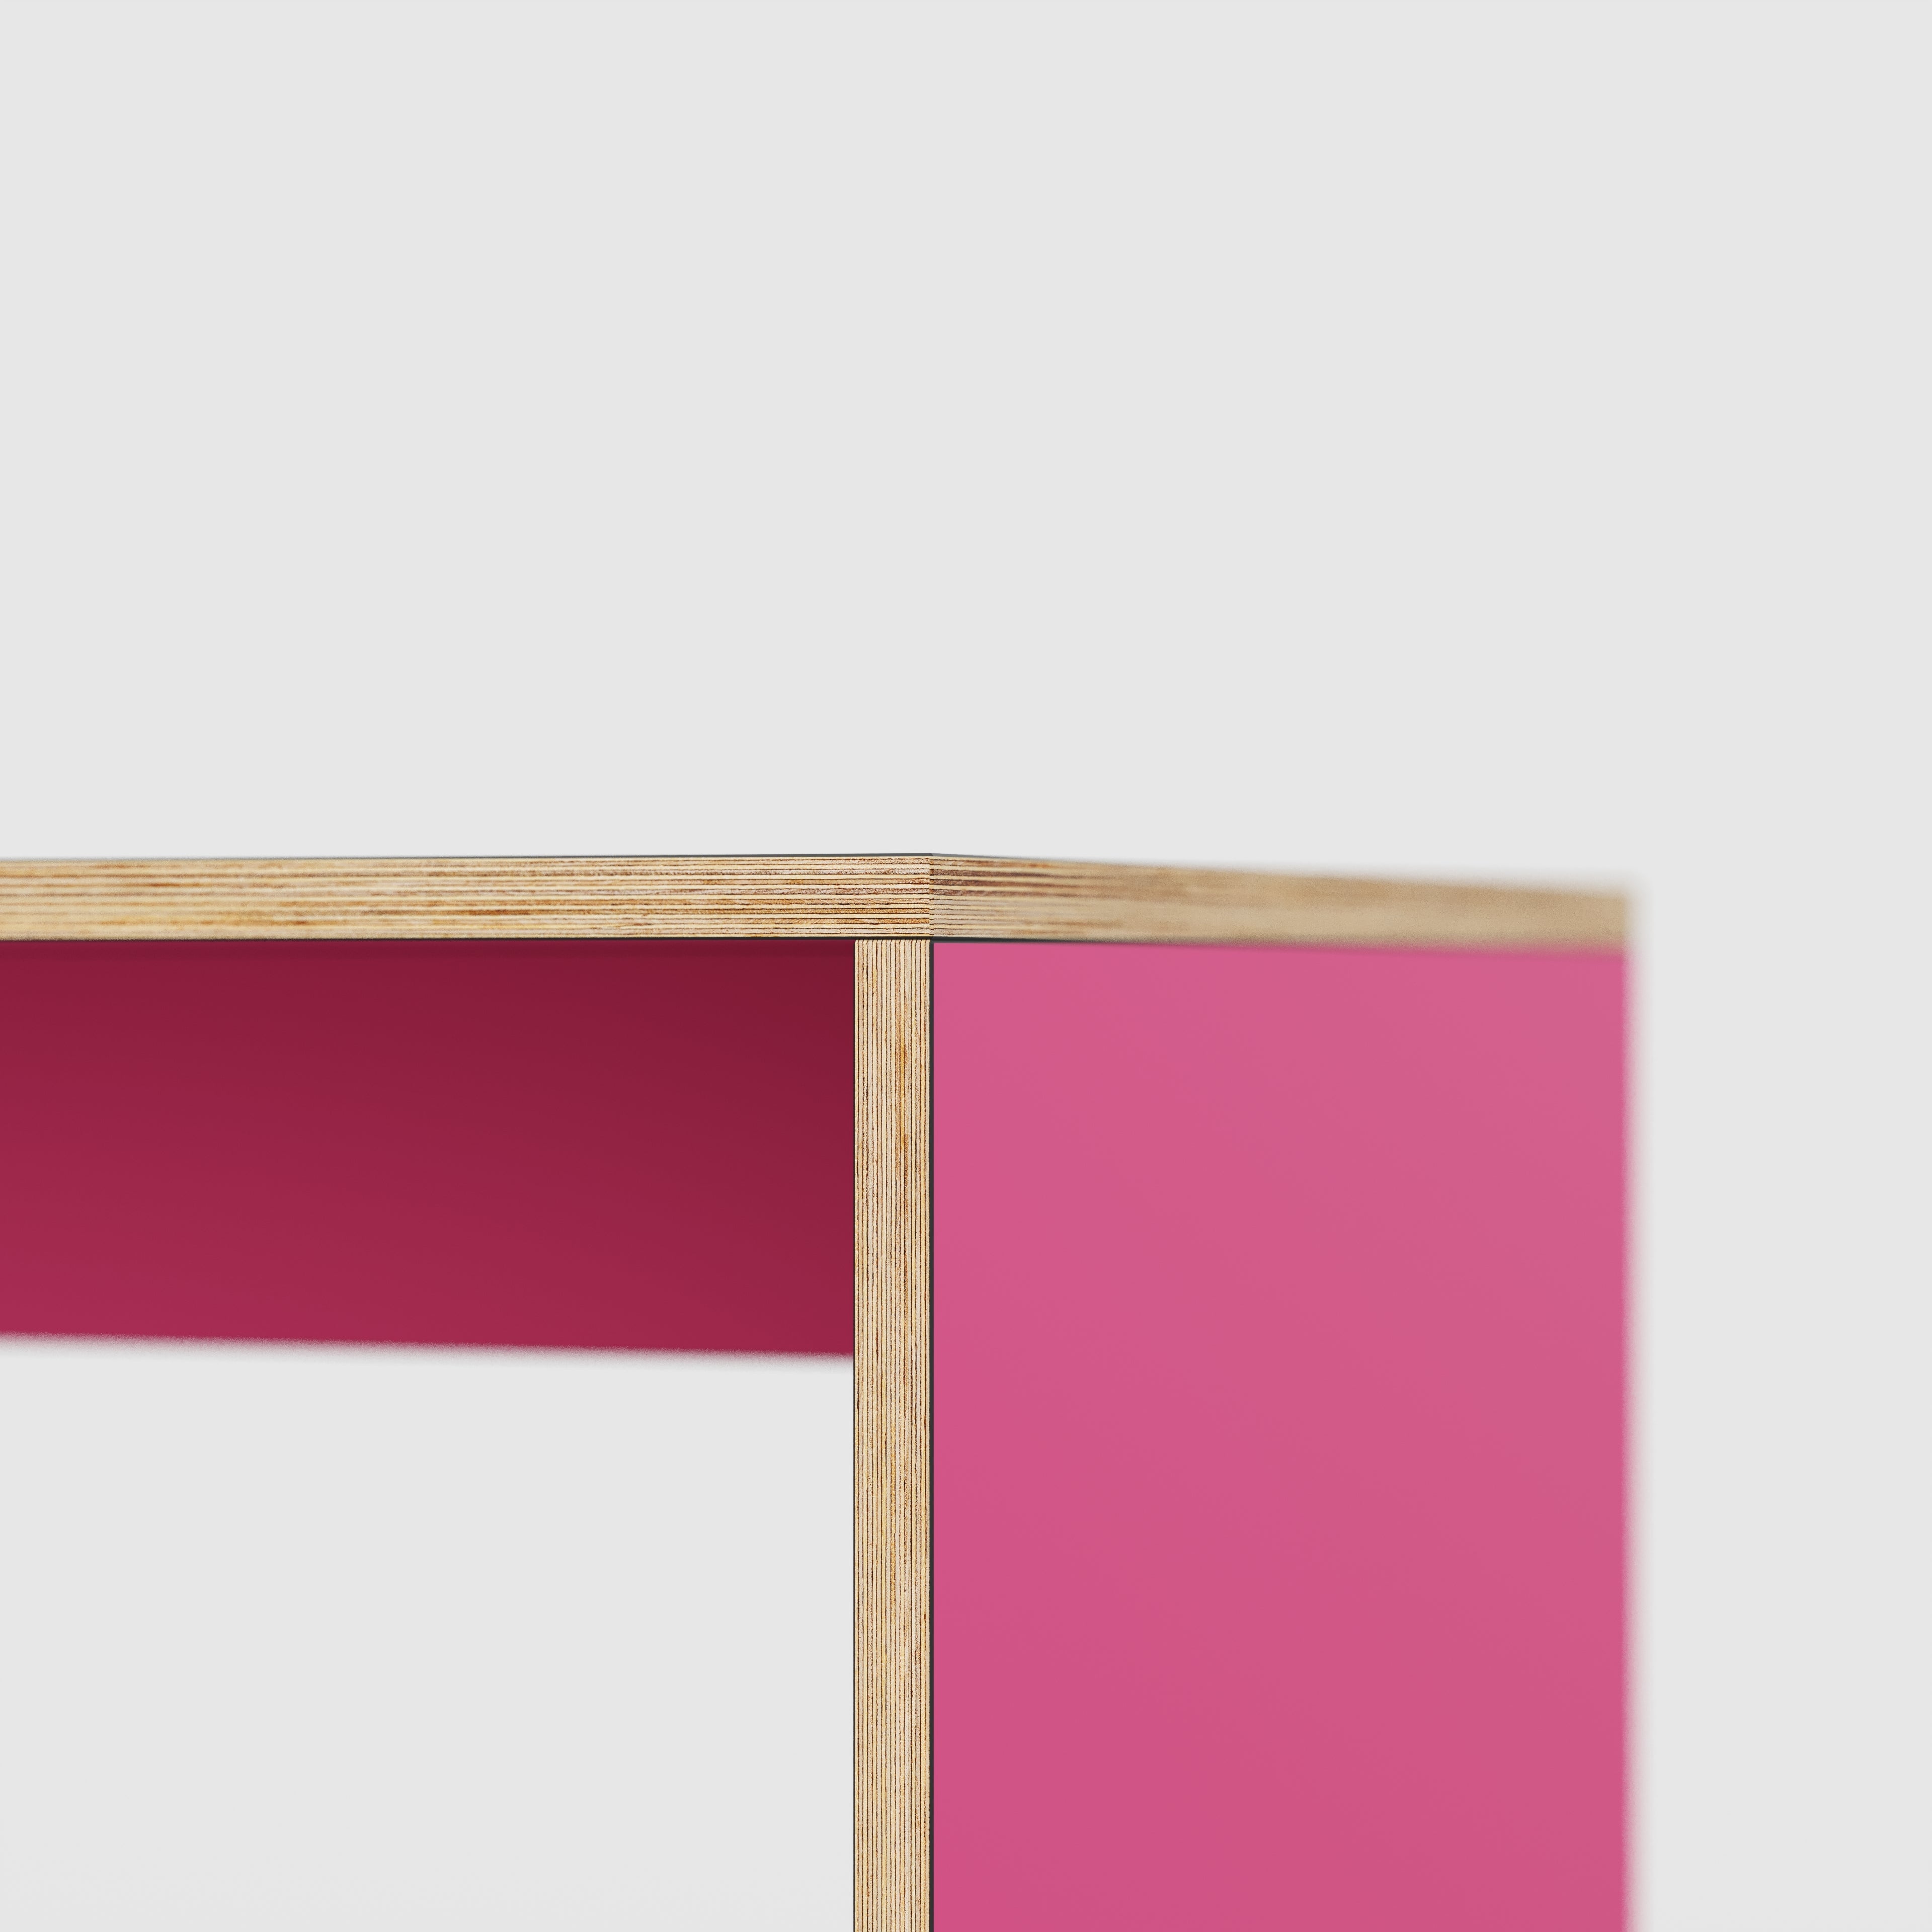 Table with Solid Sides - Formica Juicy Pink - 4000(w) x 1000(d) x 750(h)